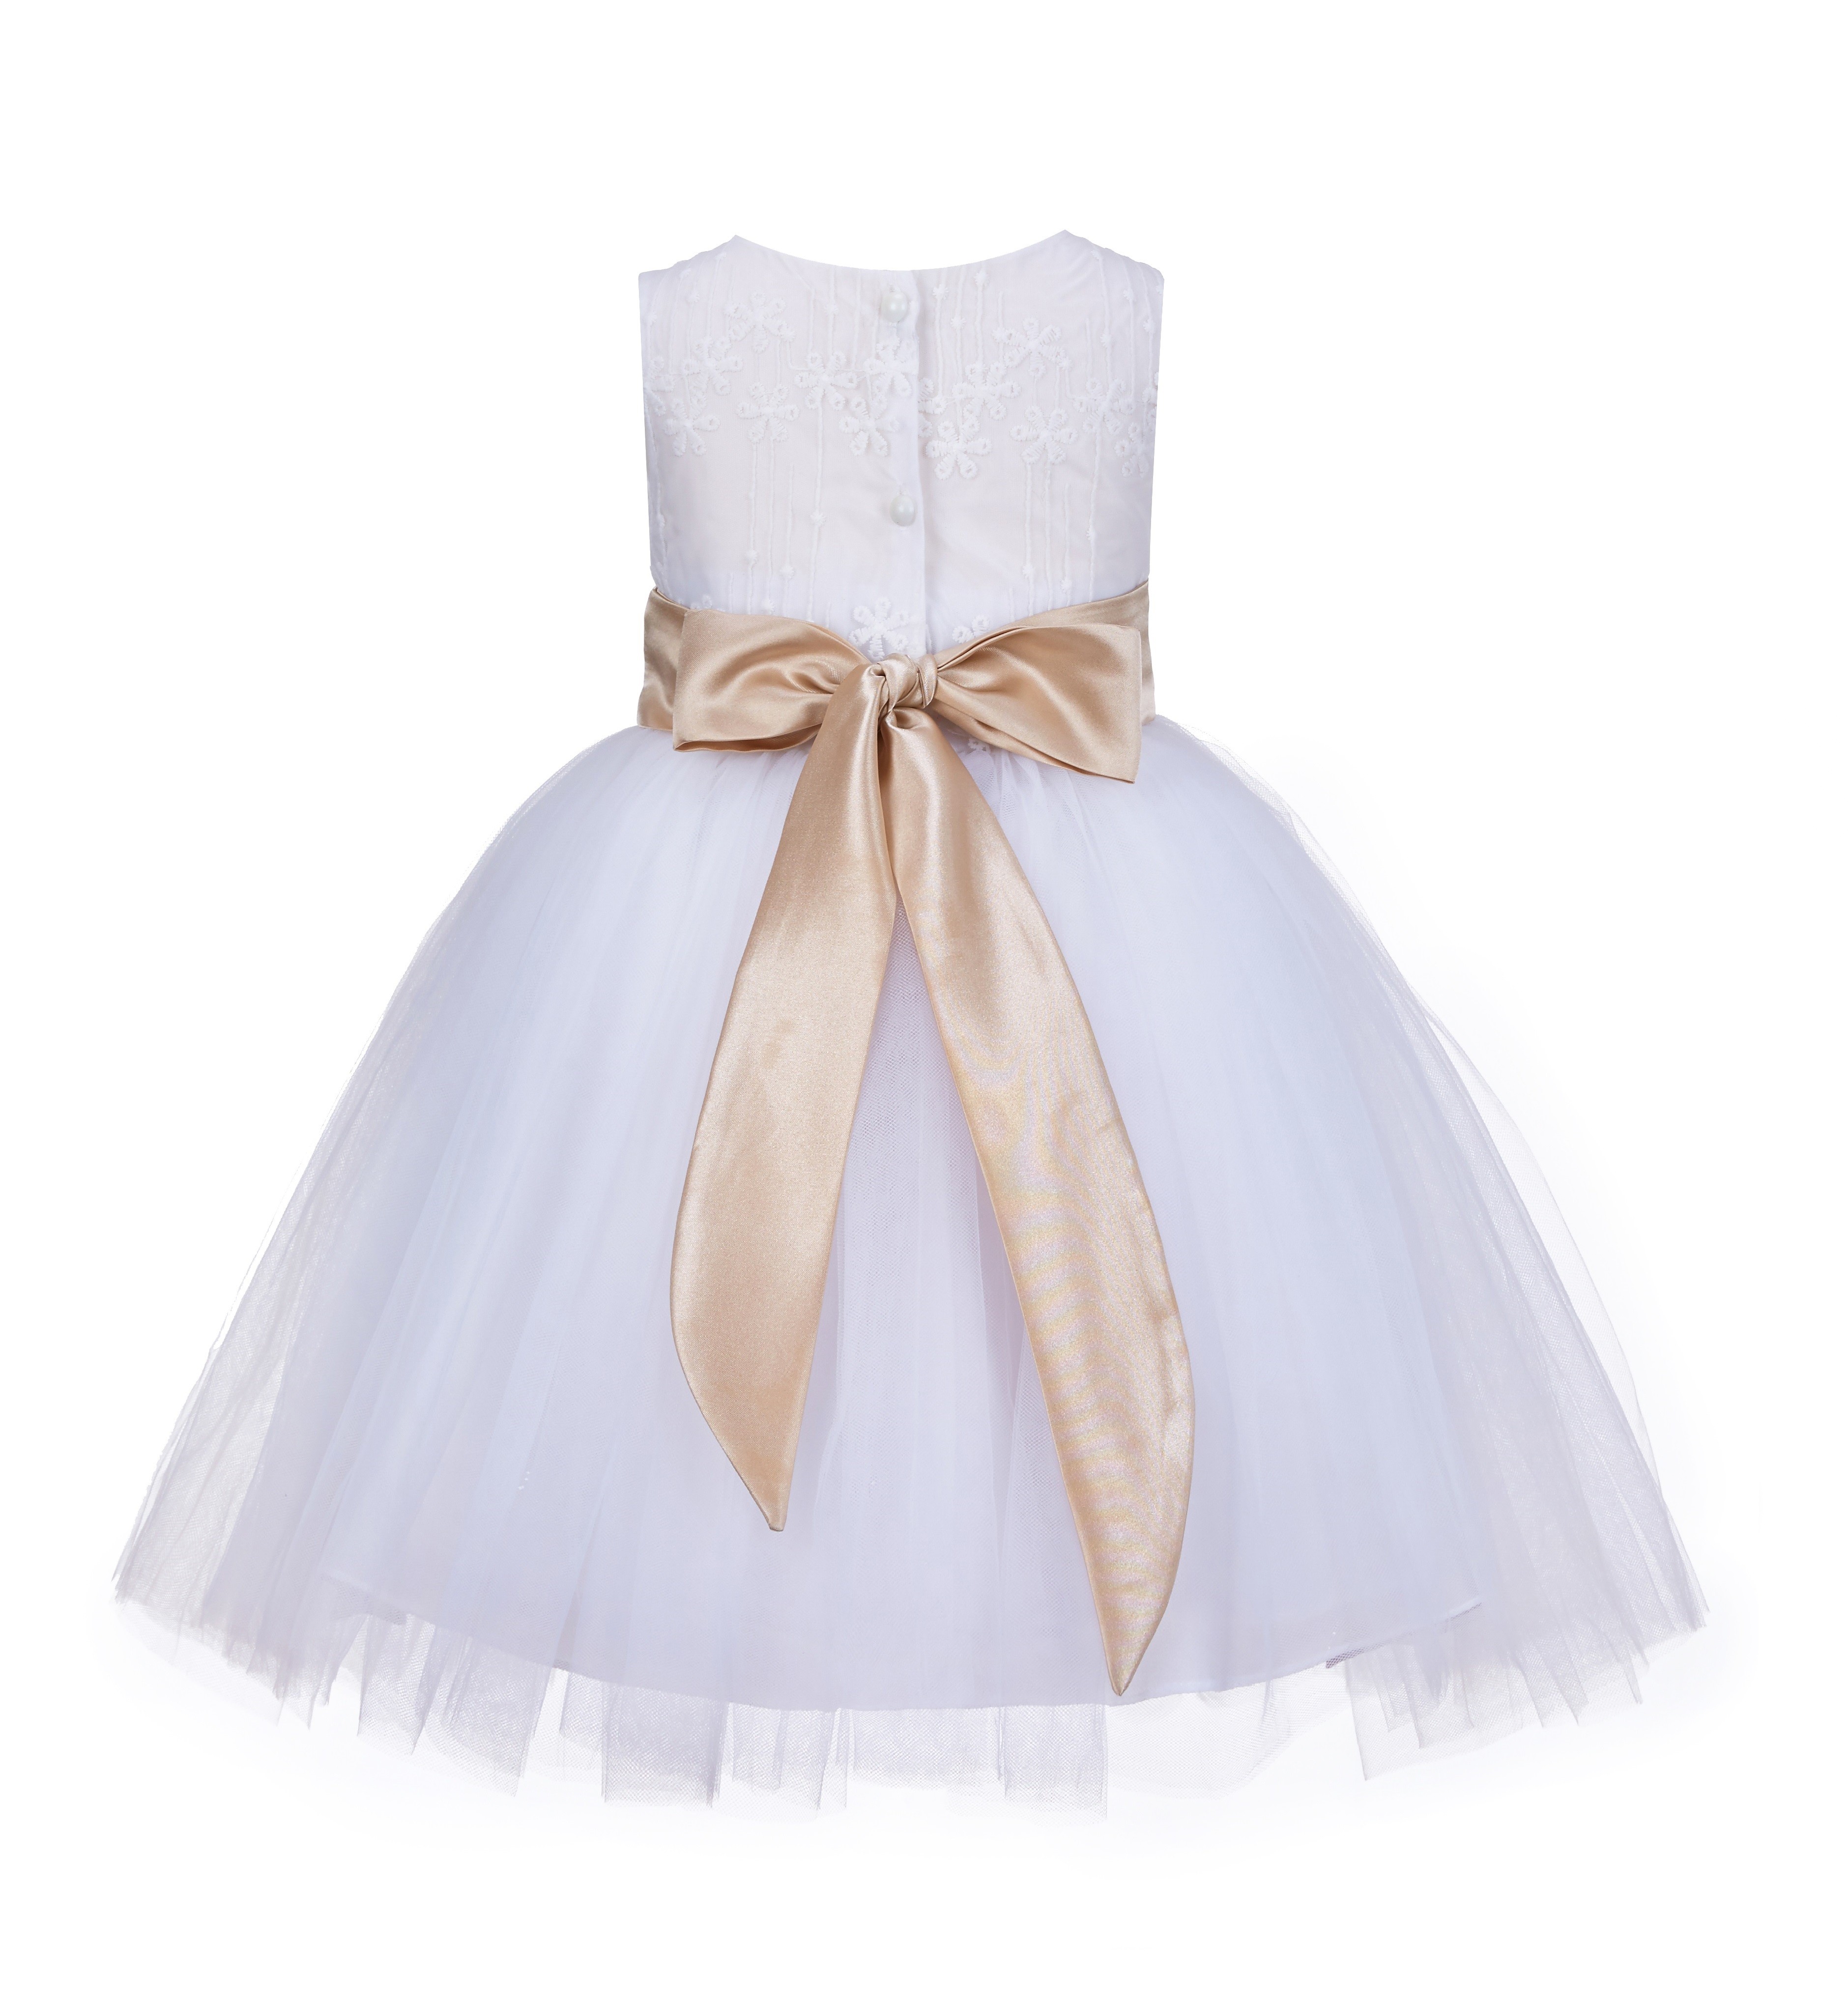 White/Champagne Lace Embroidery Tulle Flower Girl Dress Wedding 118